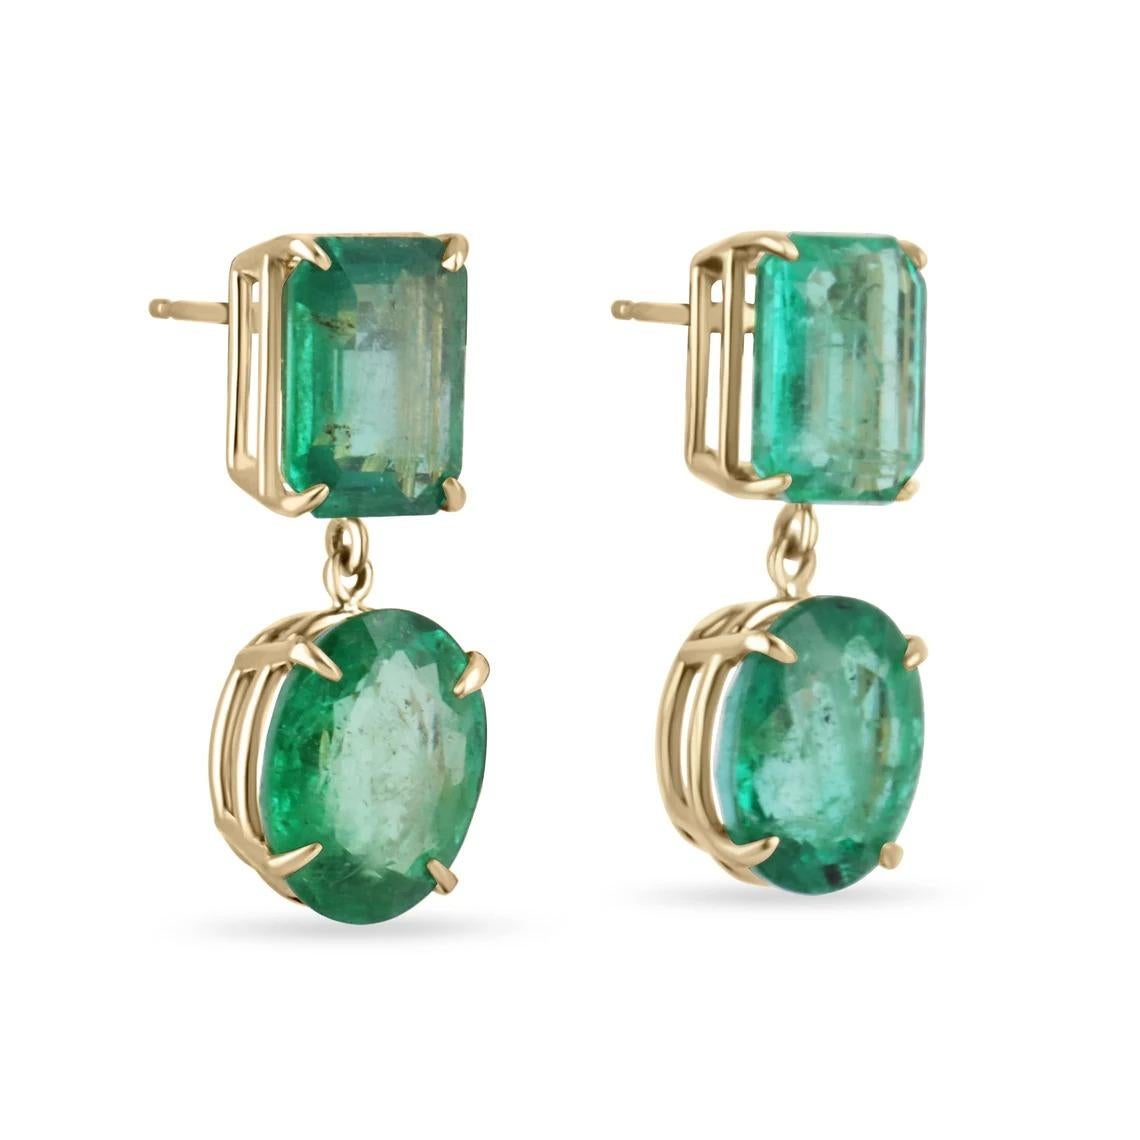 JAW-DROPPING! Large natural Emerald dangling studs dexterously handcrafted in fine solid 18K yellow gold. Displayed are fine, ONE OF A KIND set of rare emerald and oval-cut, emeralds with very good transparency, accented by a simple four-prong gold